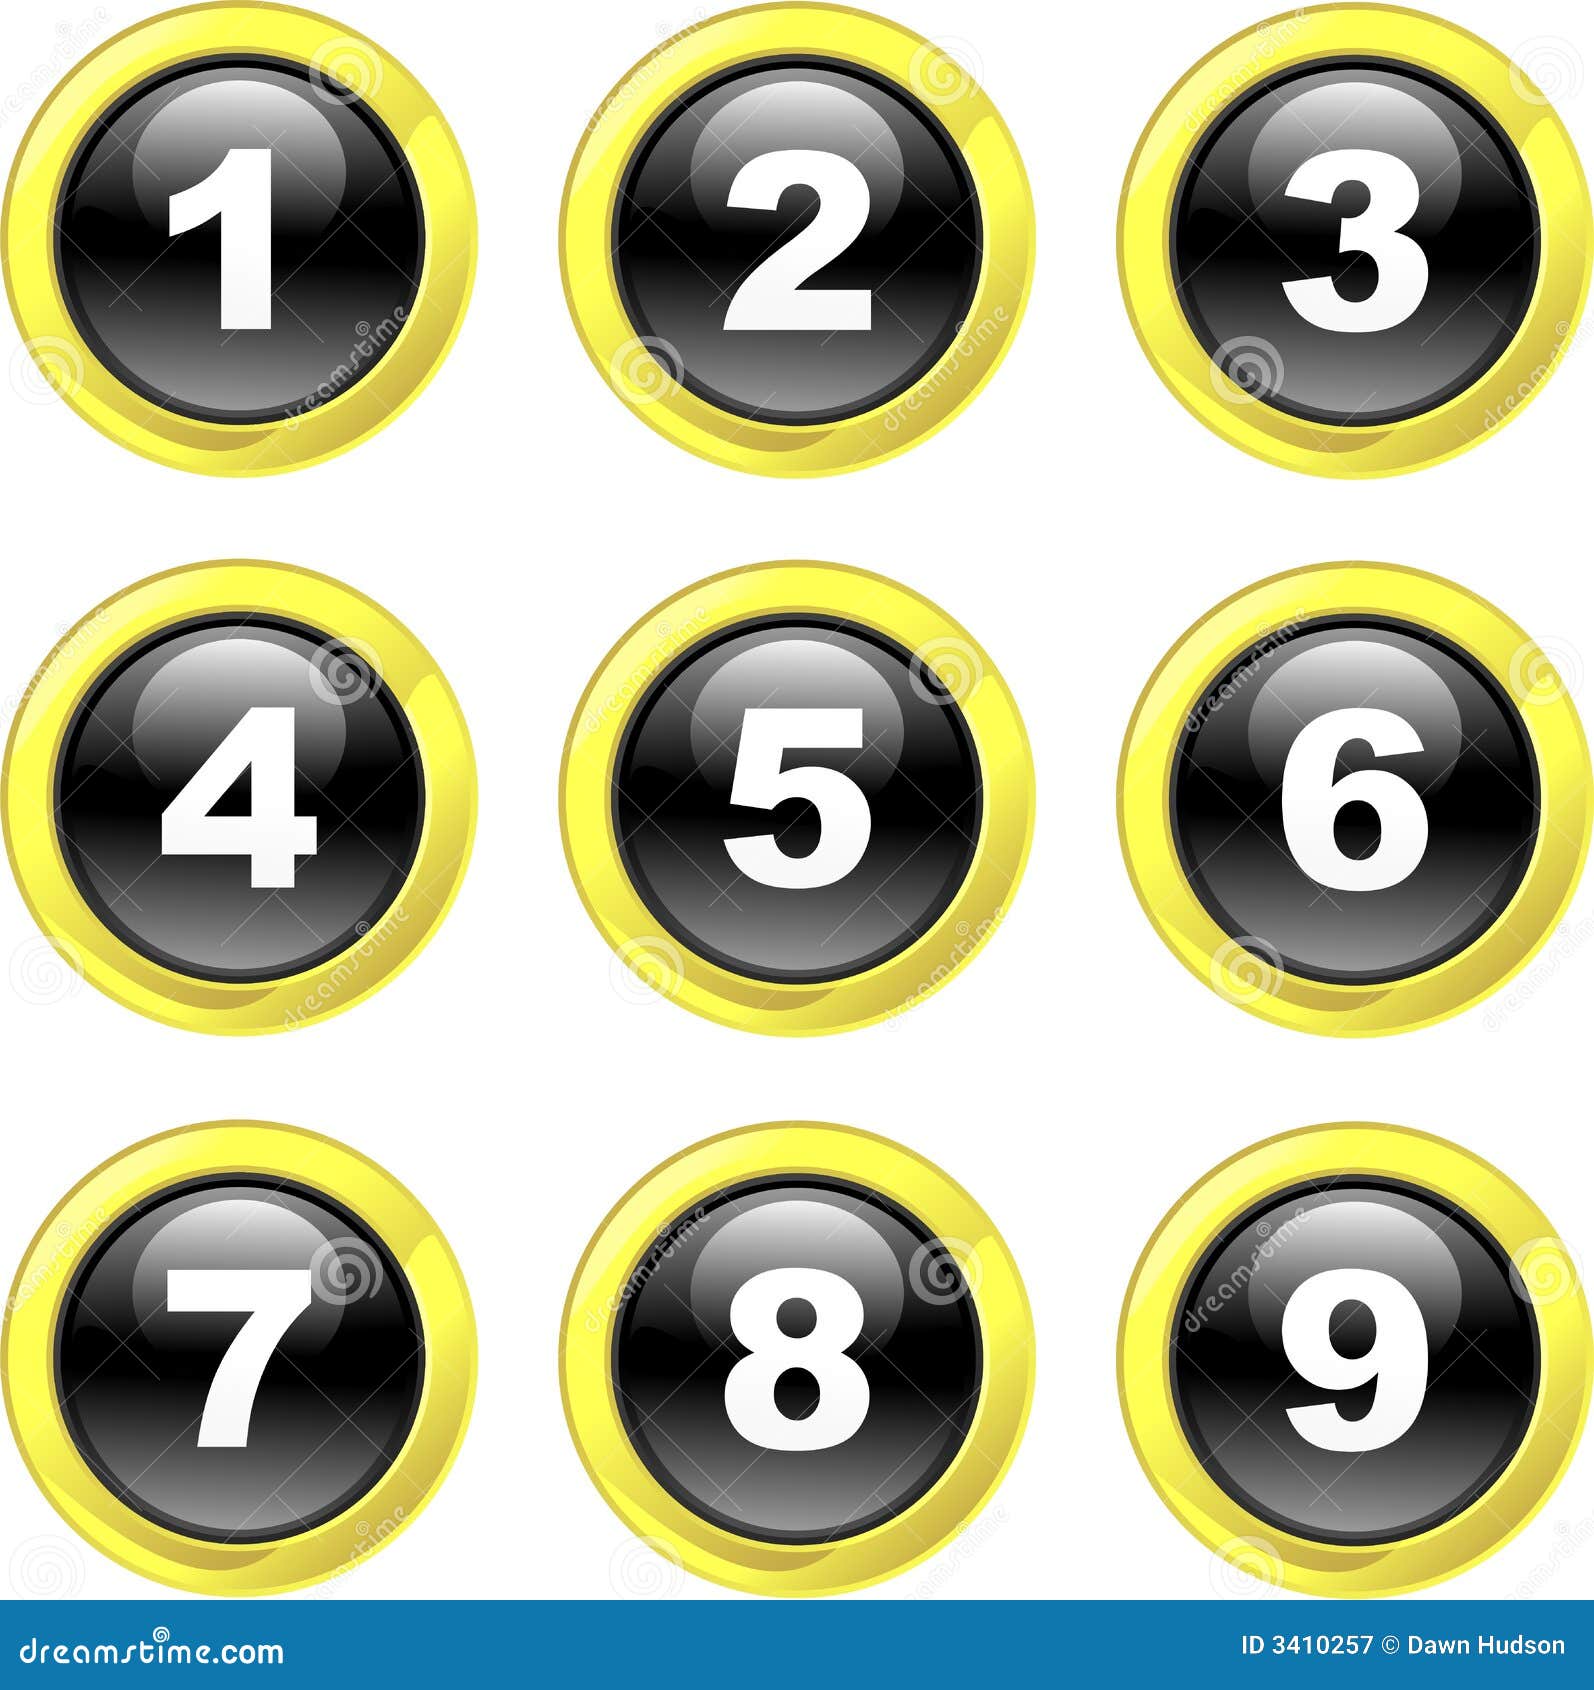 Number Icons Royalty Free Stock Photography - Image: 3410257